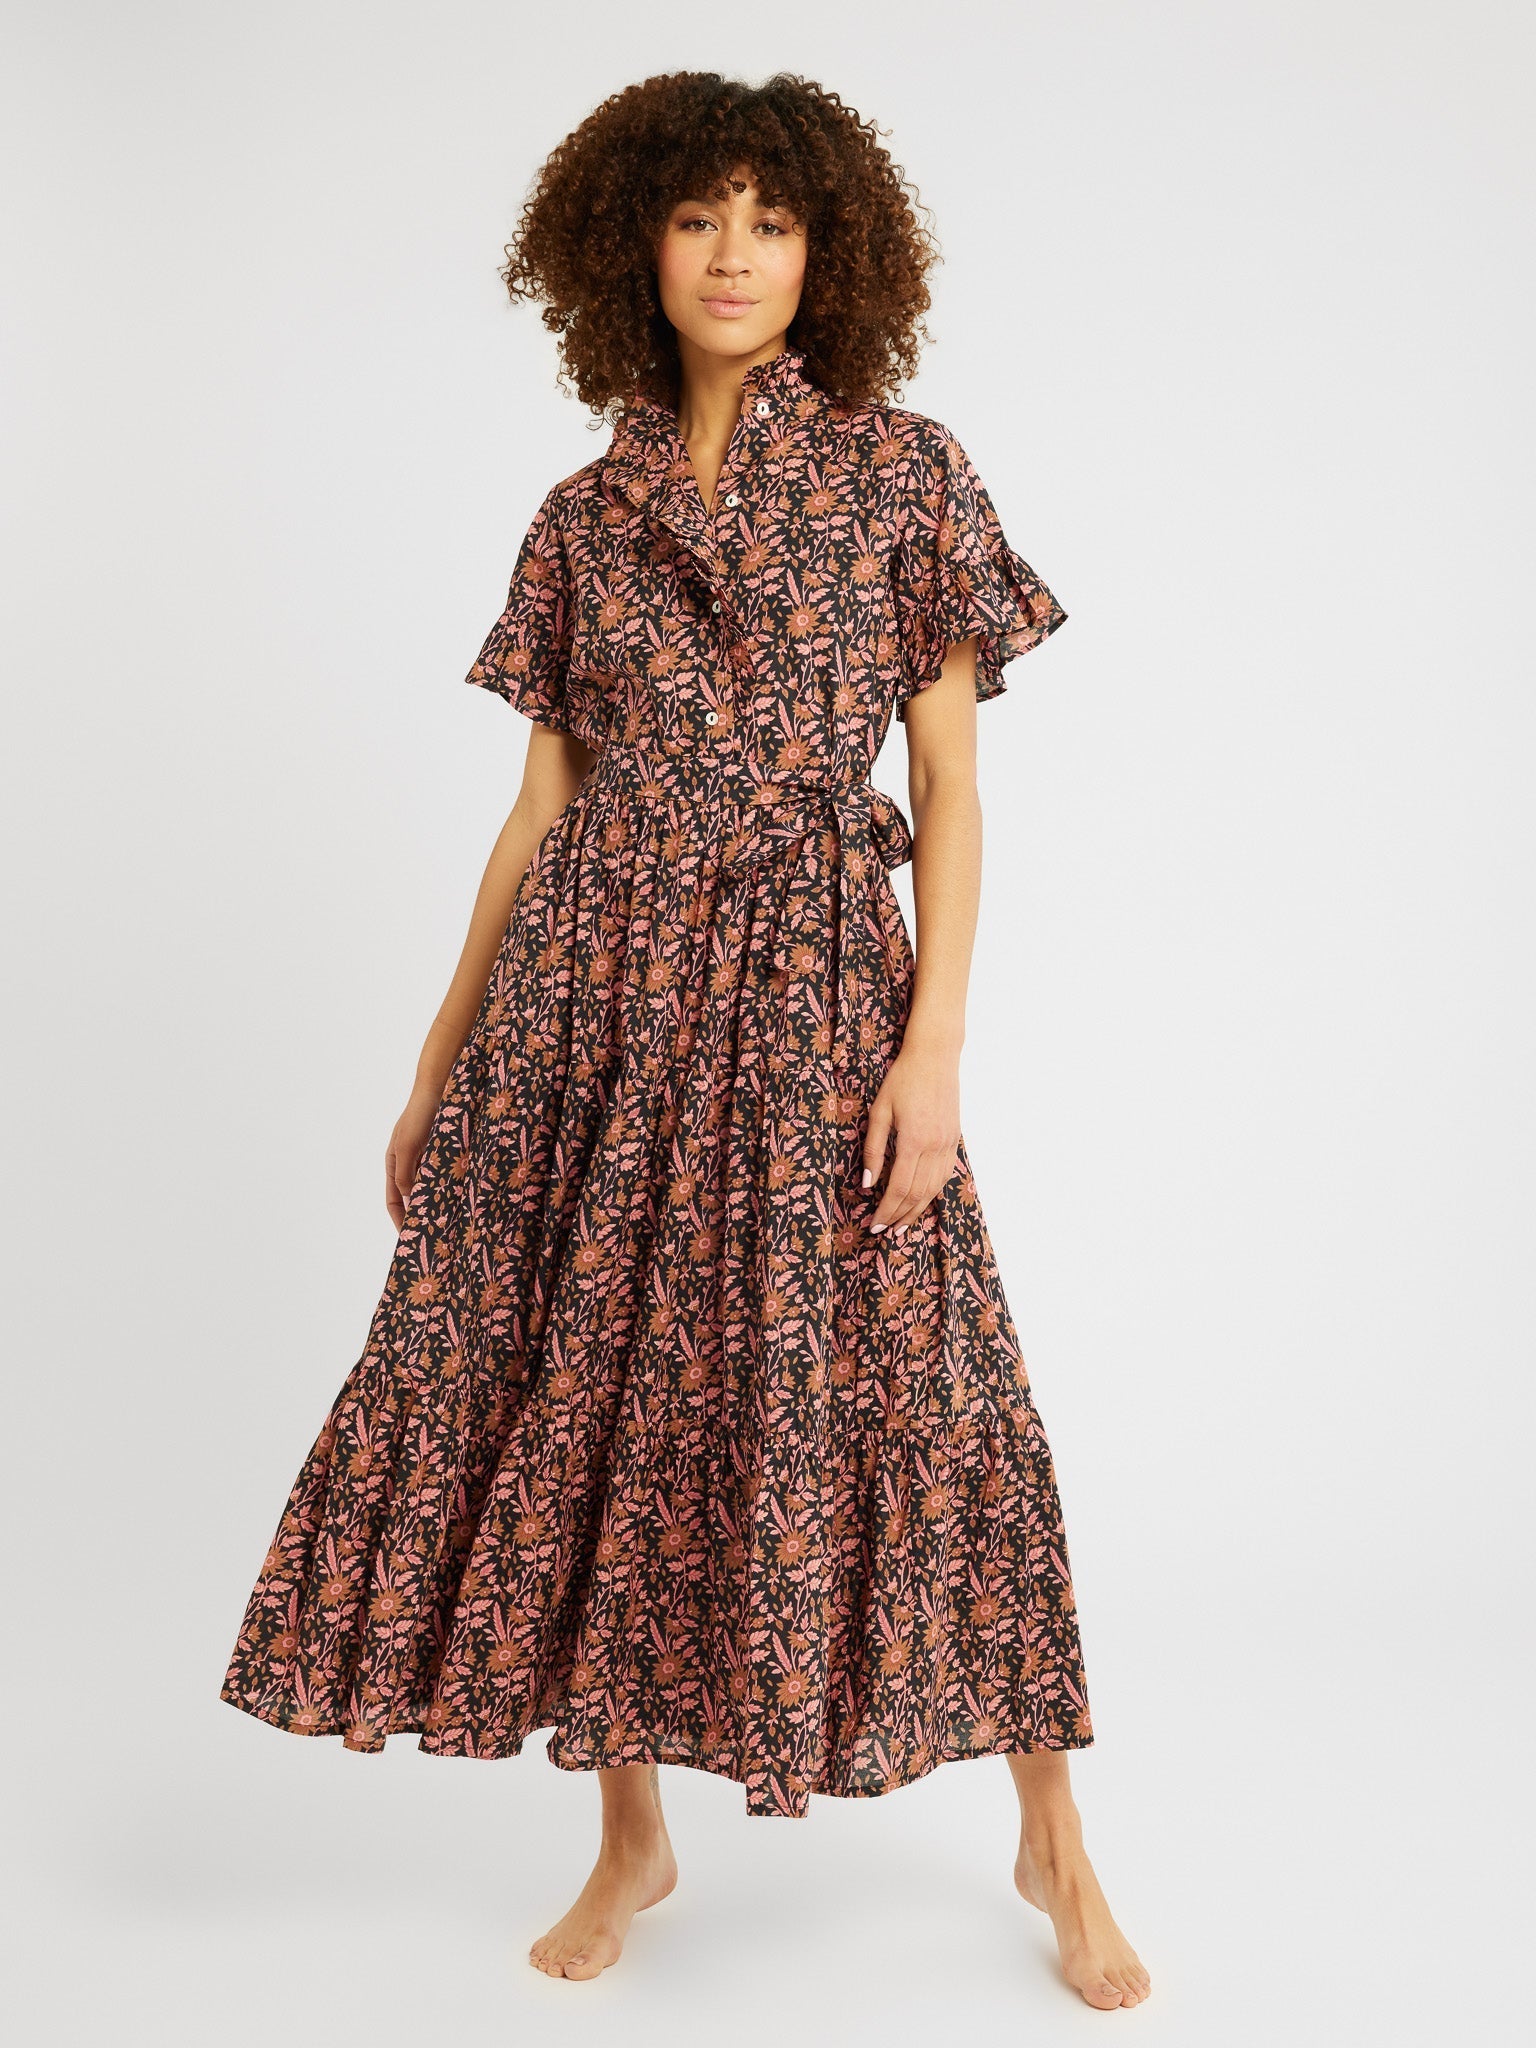 MILLE Clothing Victoria Dress in Fiore